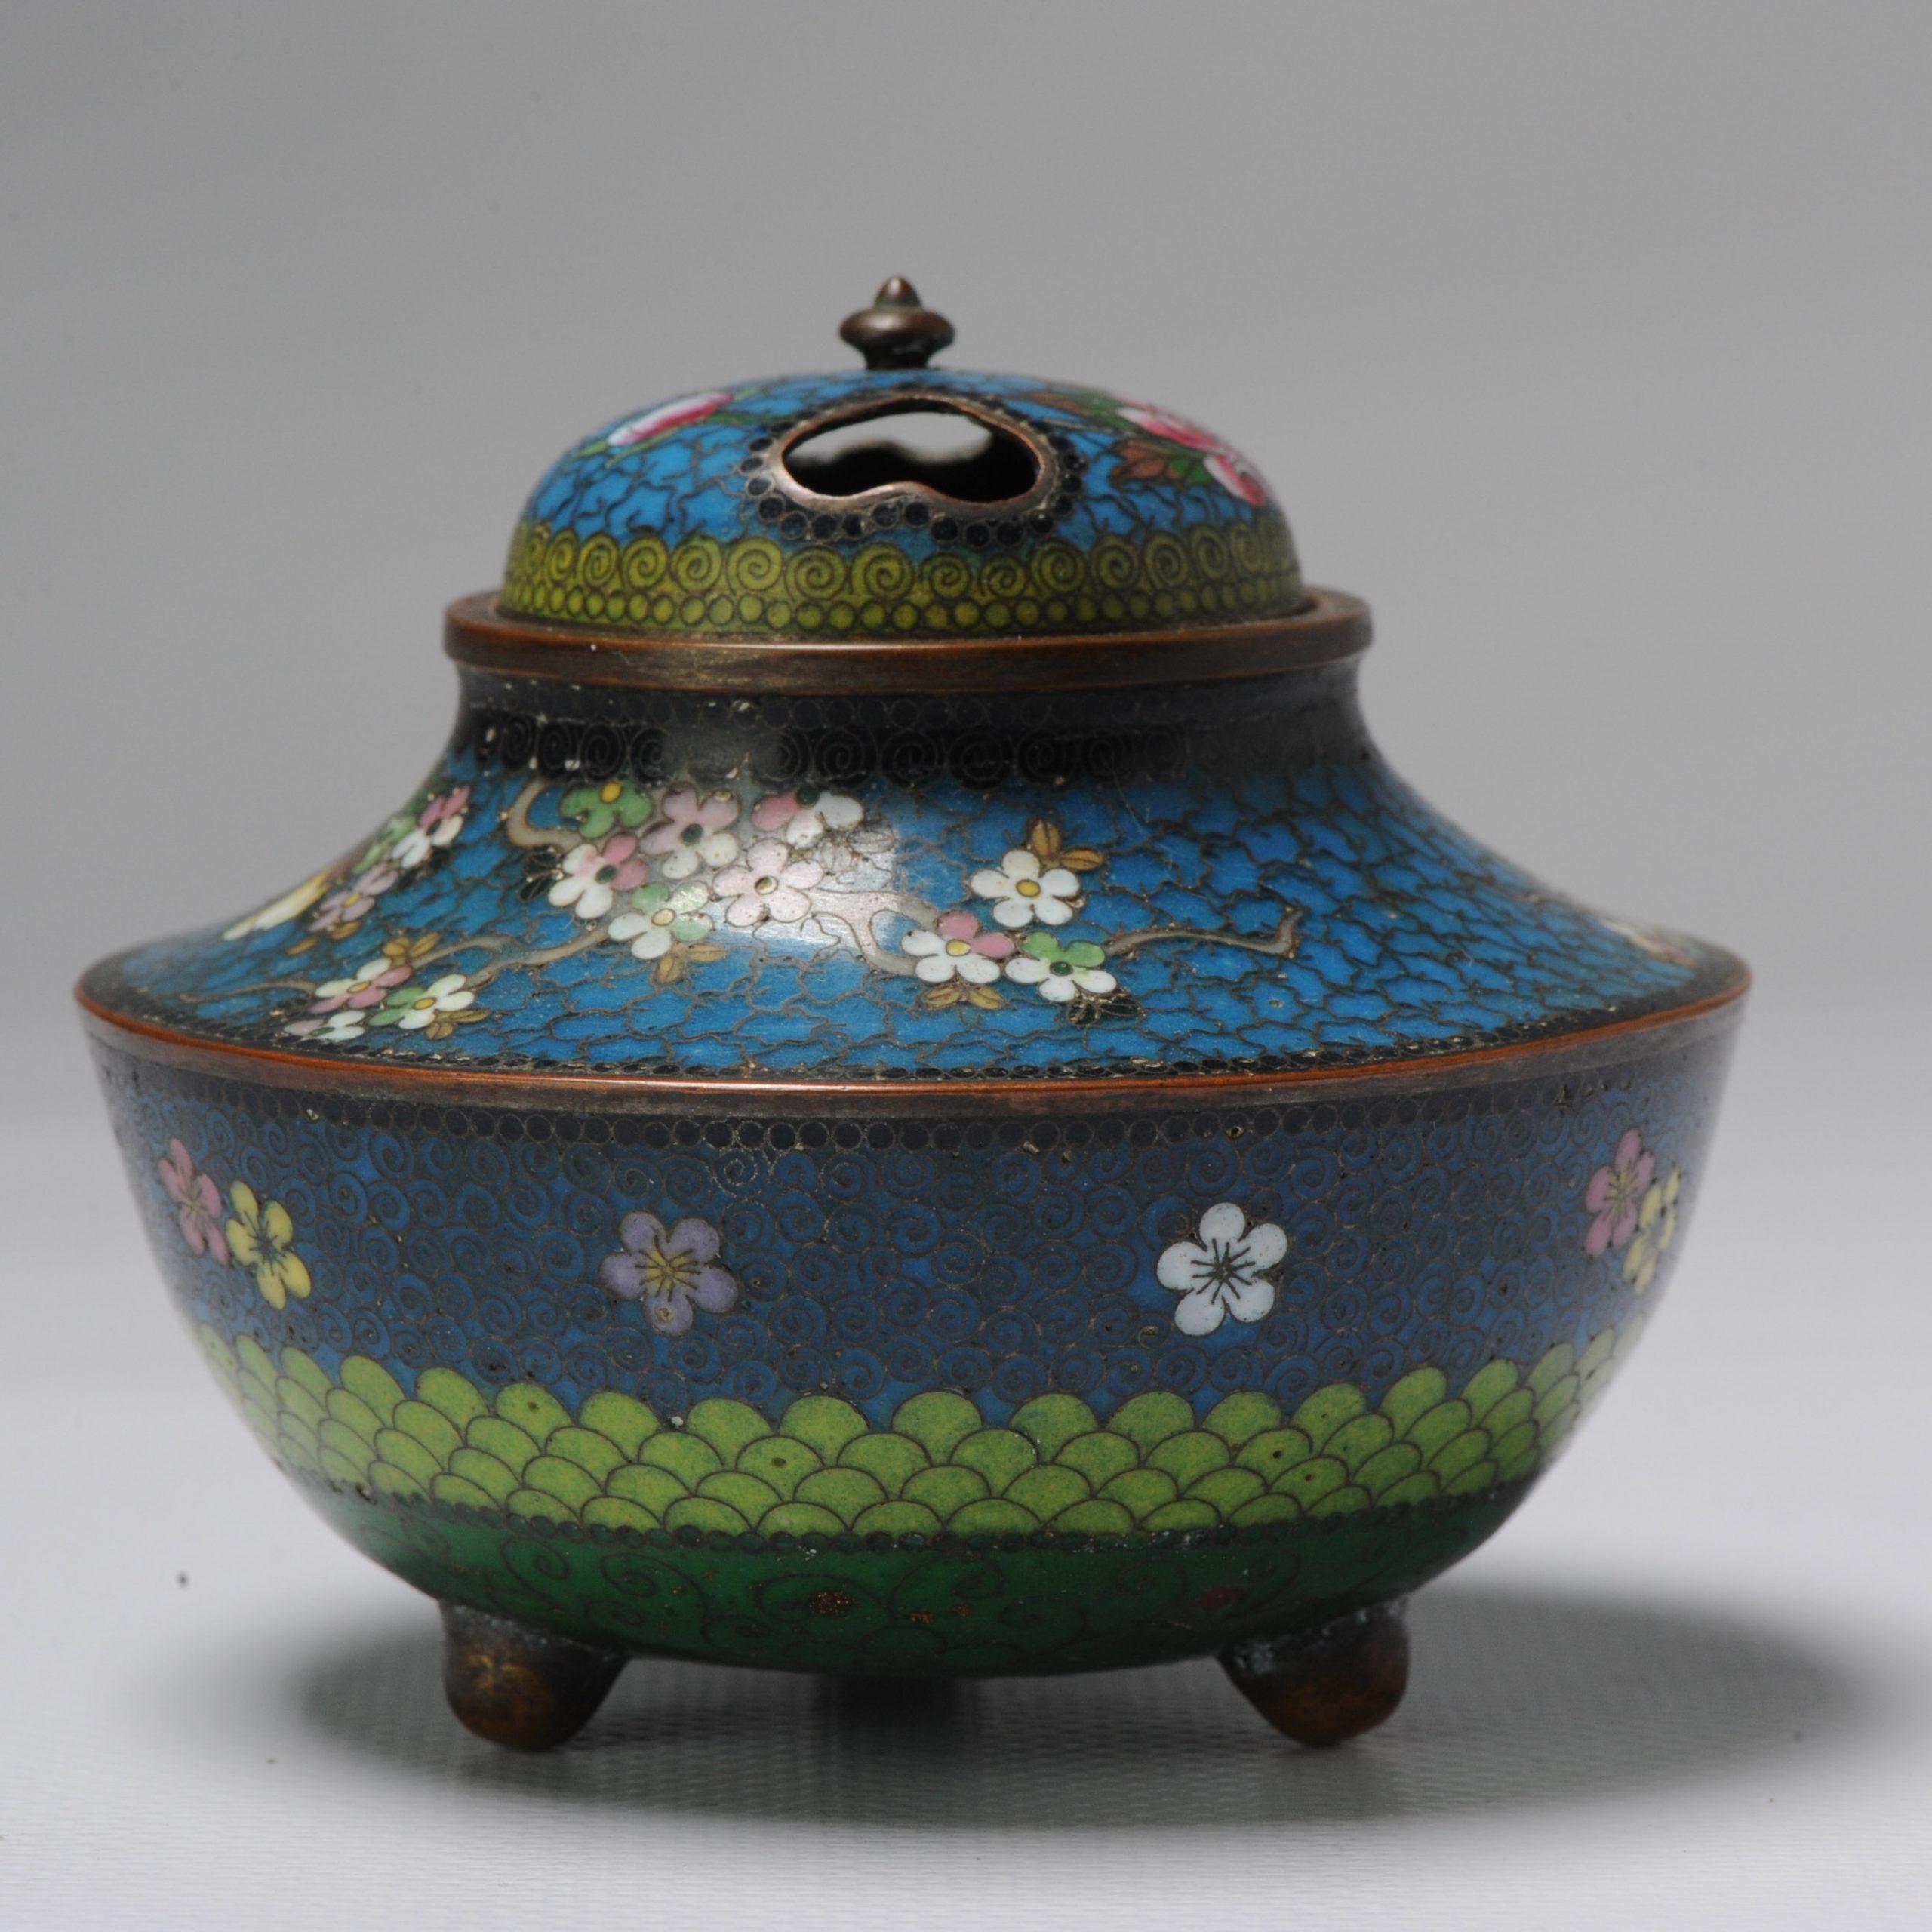 Lovely and beautifully made piece.

Provenance:

Originally part of the Catherina collection of Japanese bronzes and cloisonne that was partly auctioned in Amsterdam in 2006 at Sothebys. Some pieces are pictured in the catalogue of the collection